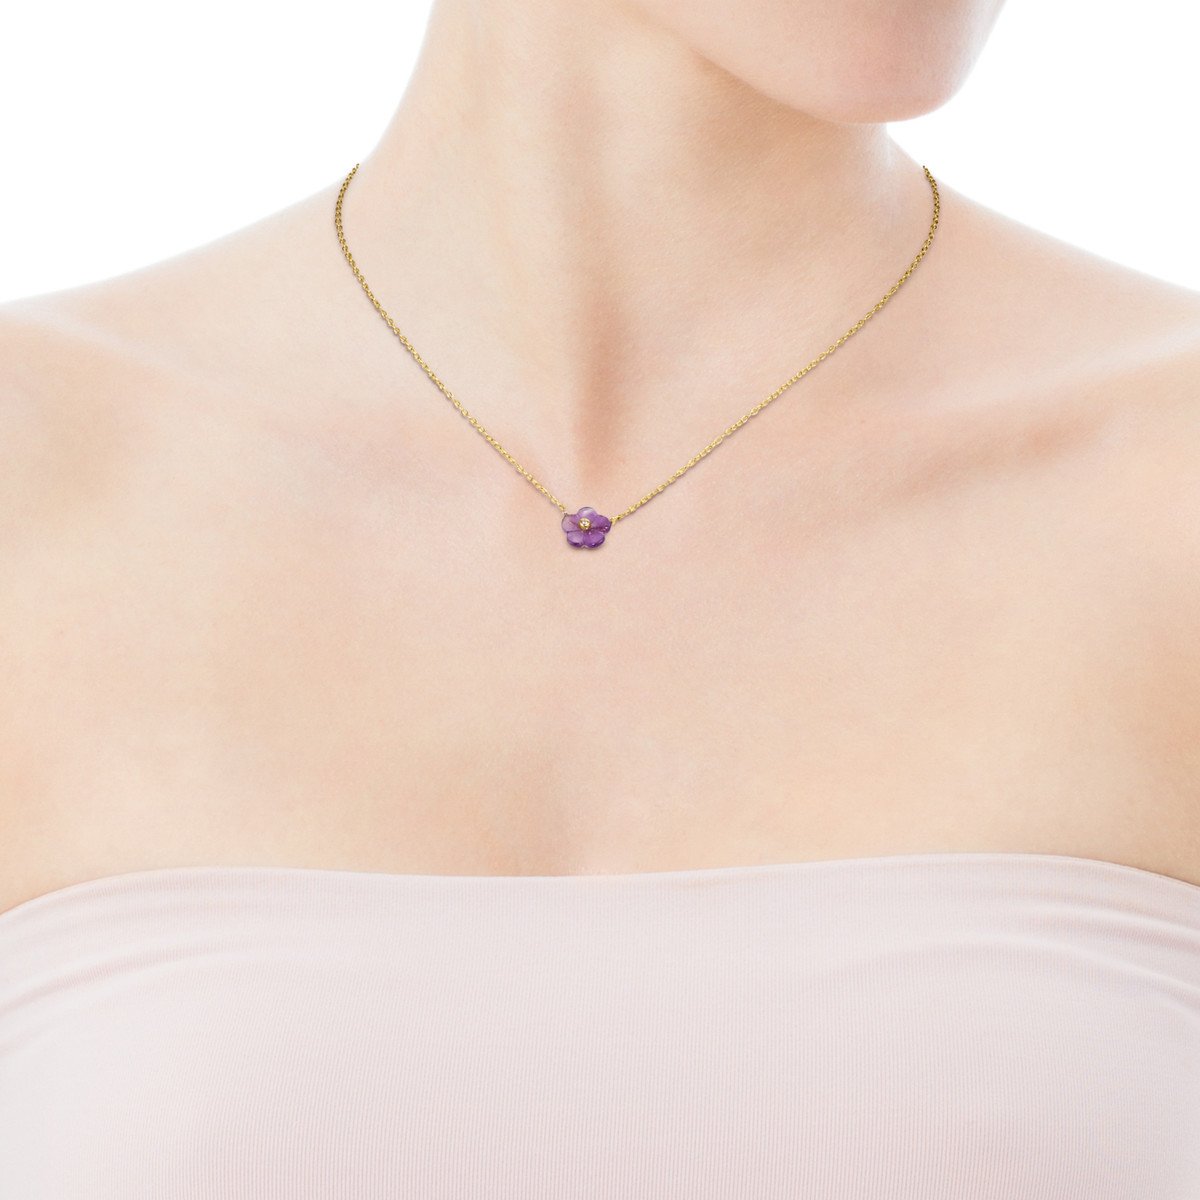 Tous Vita Necklace in Gold with Amethyst and Diamond 918532030 –